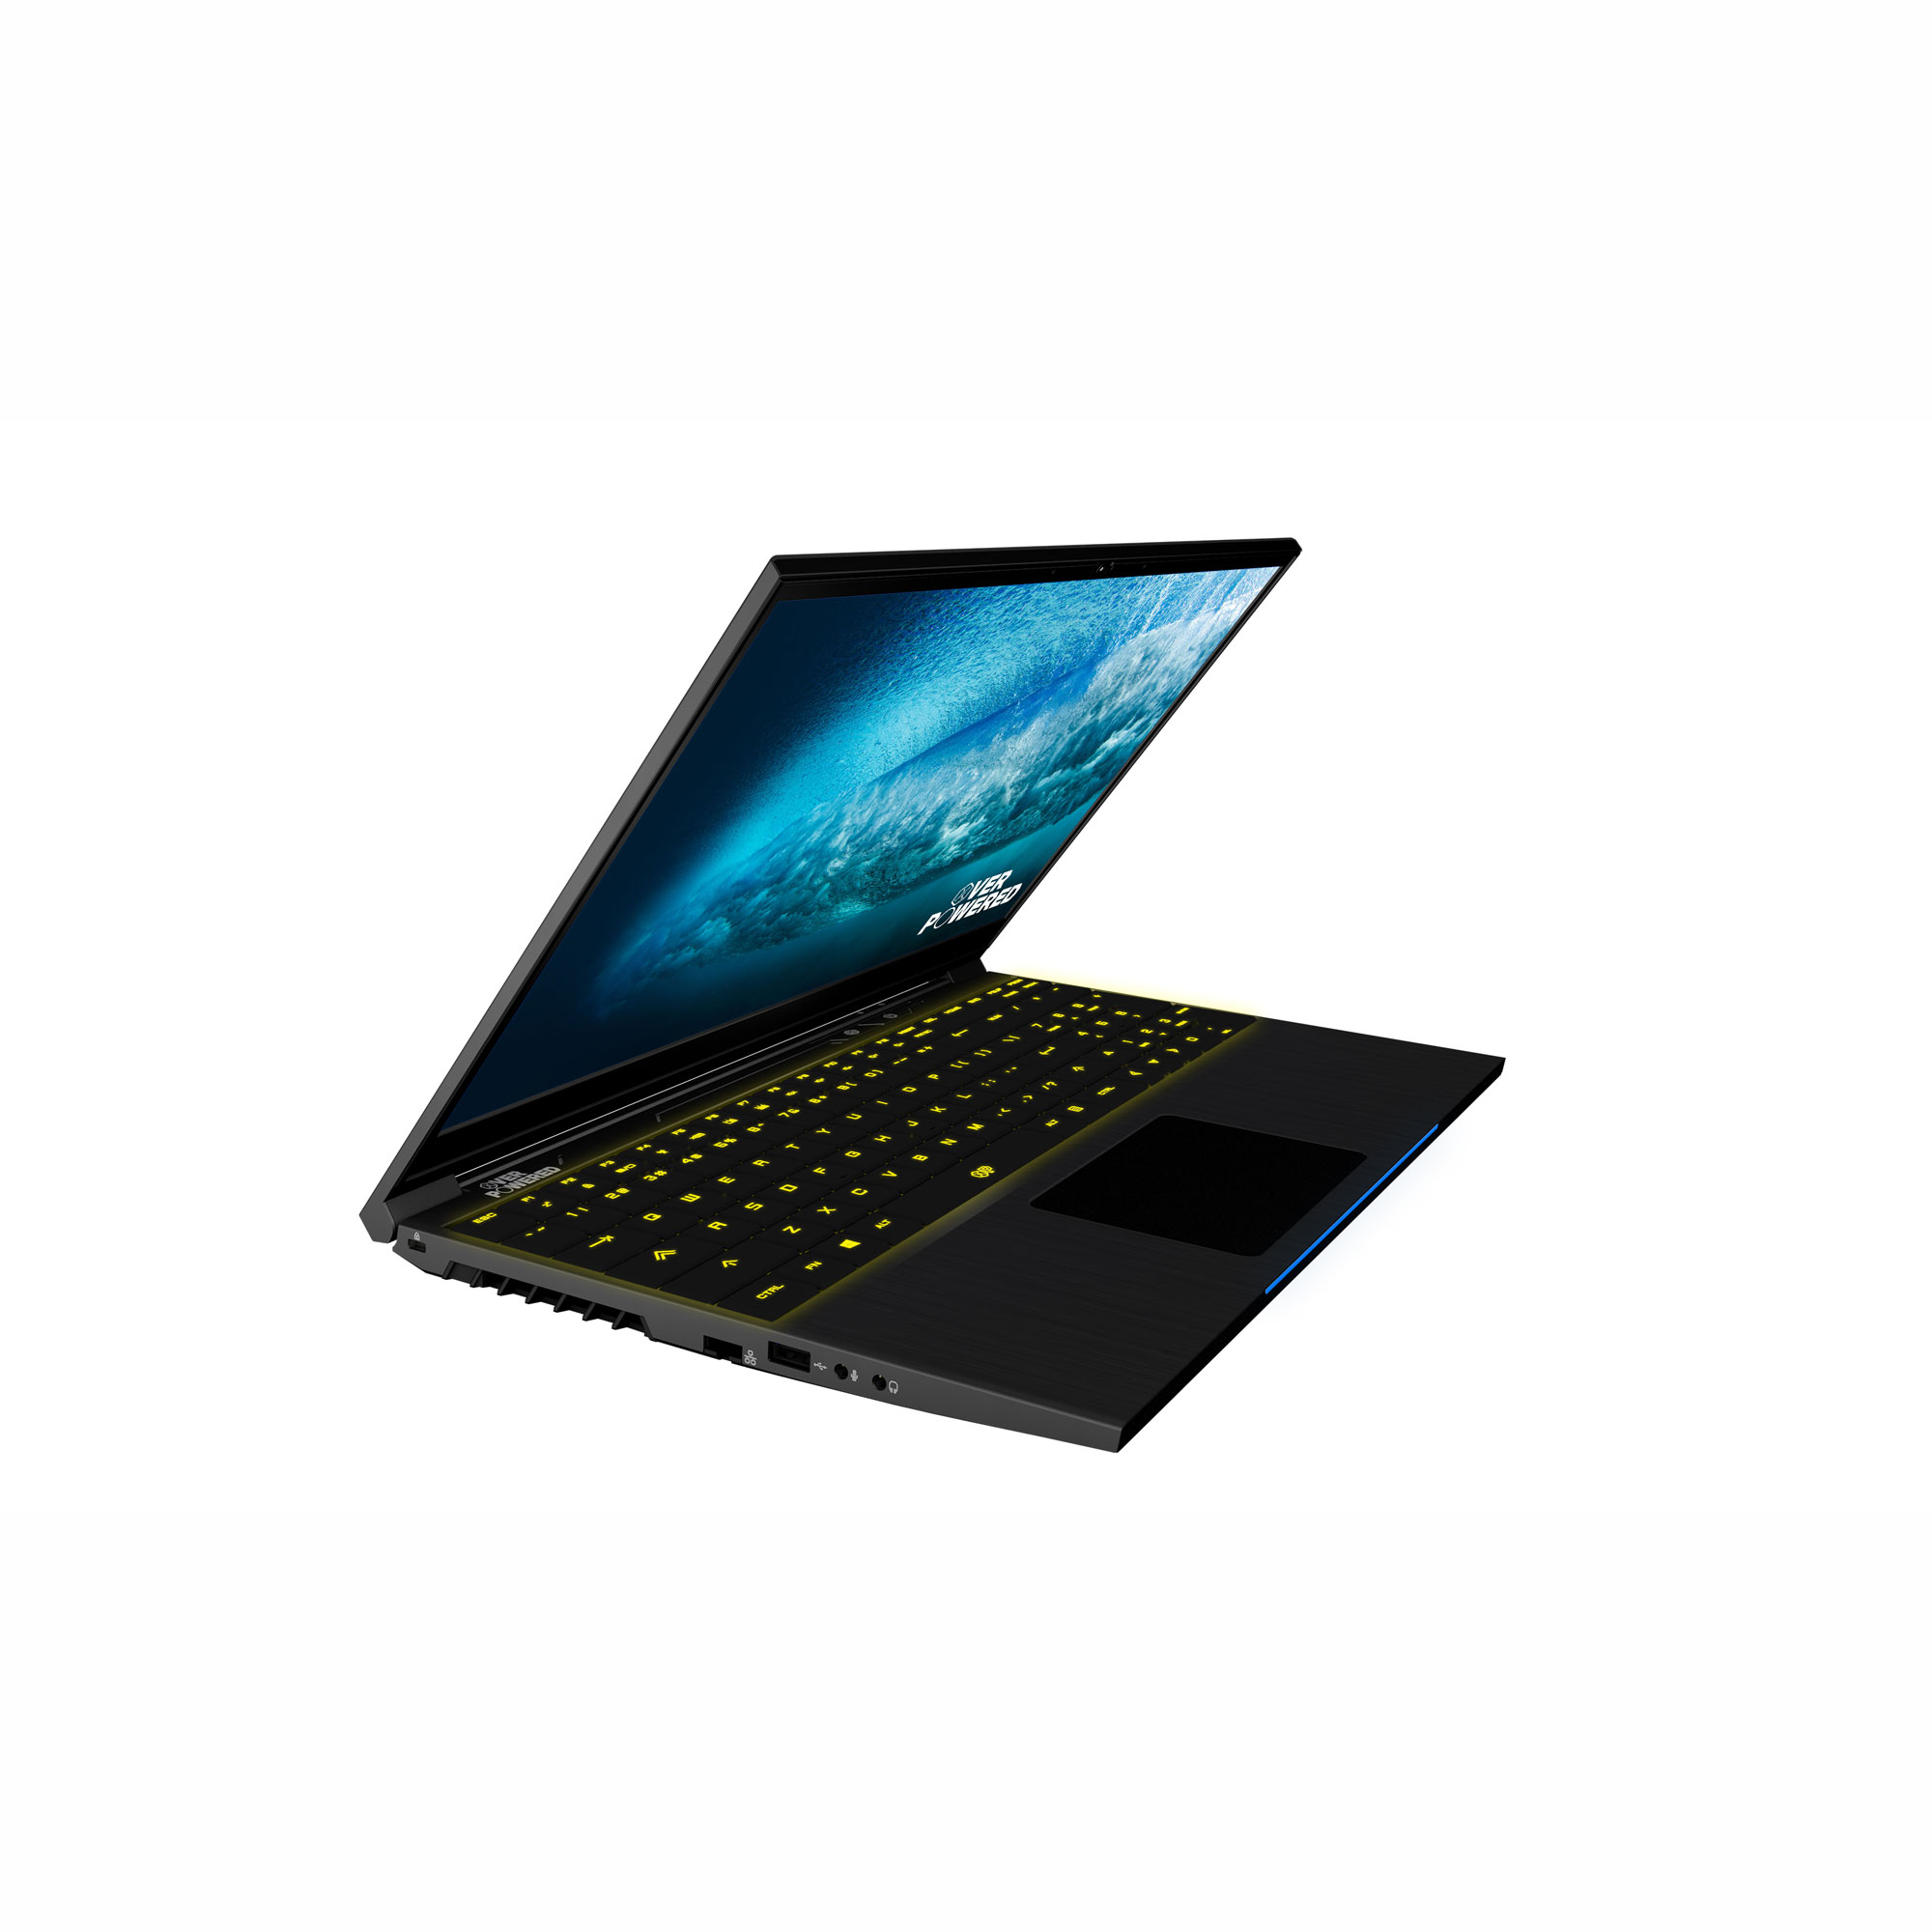 OVERPOWERED Gaming Laptop 15, 2 Year Warranty, 144Hz, Intel i5-8300H, NVIDIA GeForce GTX 1050, Mechanical LED Keyboard, 128 SSD, 1TB HDD, 8GB RAM, Windows 10 - image 3 of 5